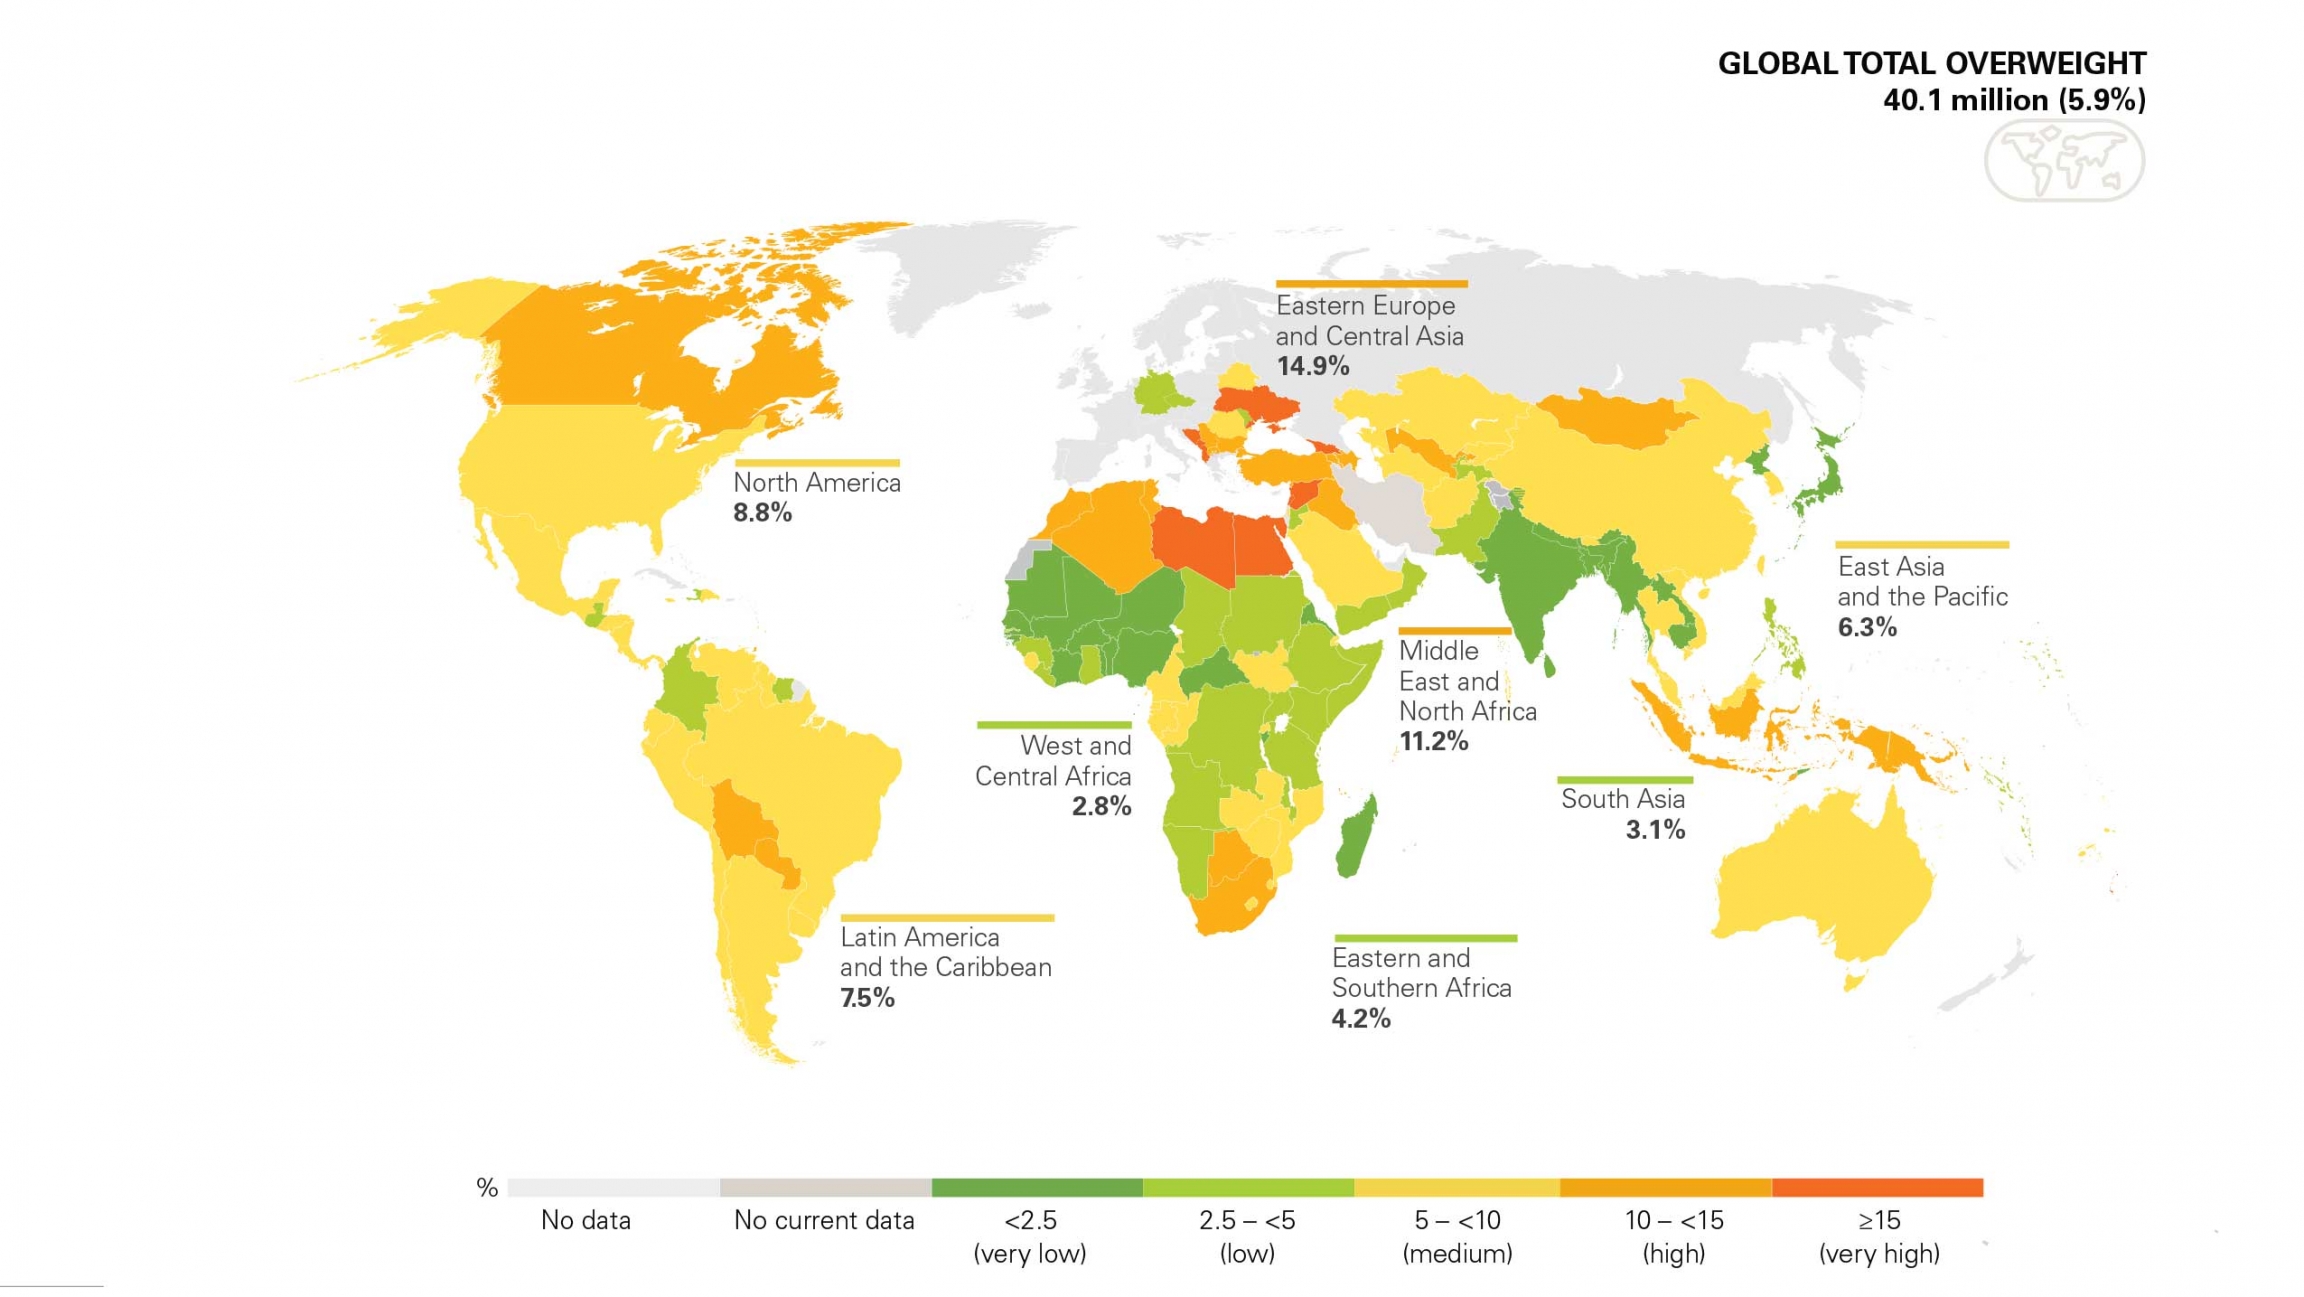 A world map shows rates of overweight children